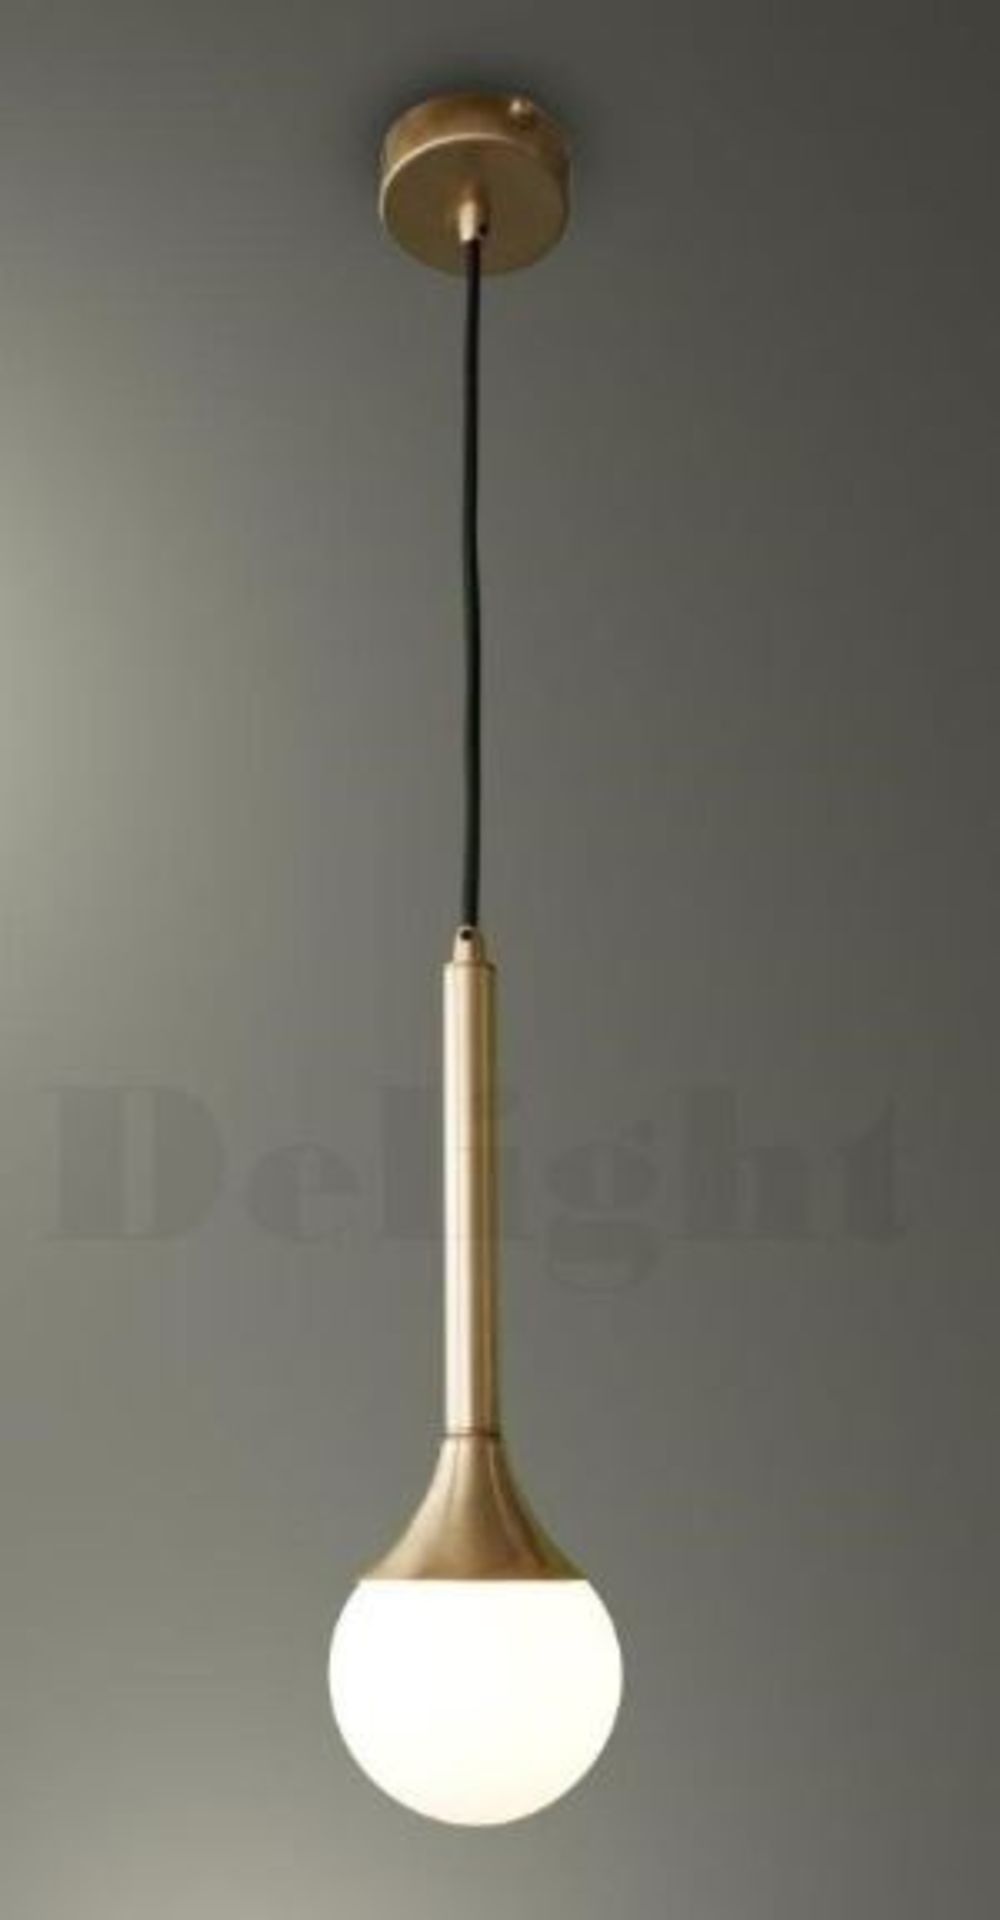 4 x Hand Made 'Petite' Suspension LED Ceiling Lights By Delight Lighting